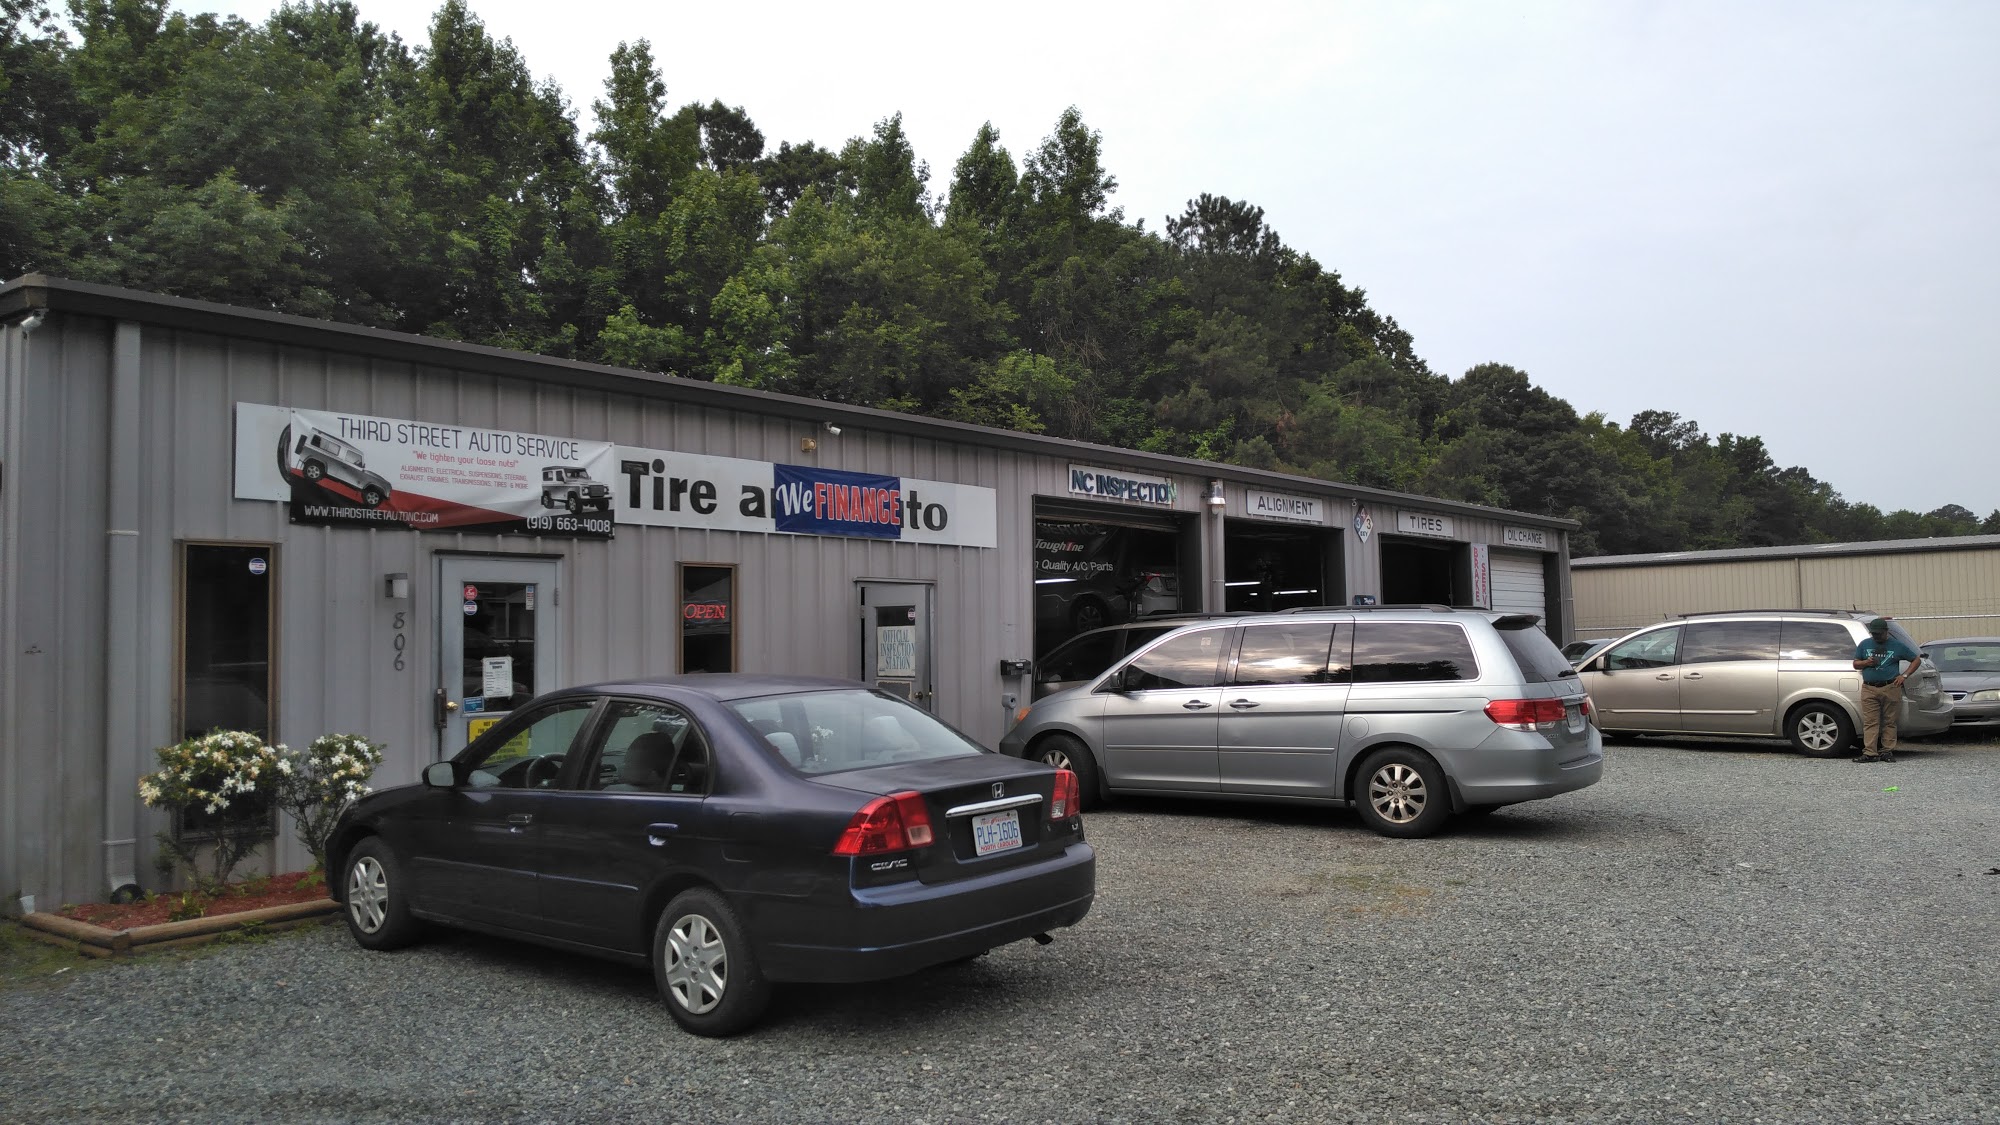 Third Street Tire and Auto